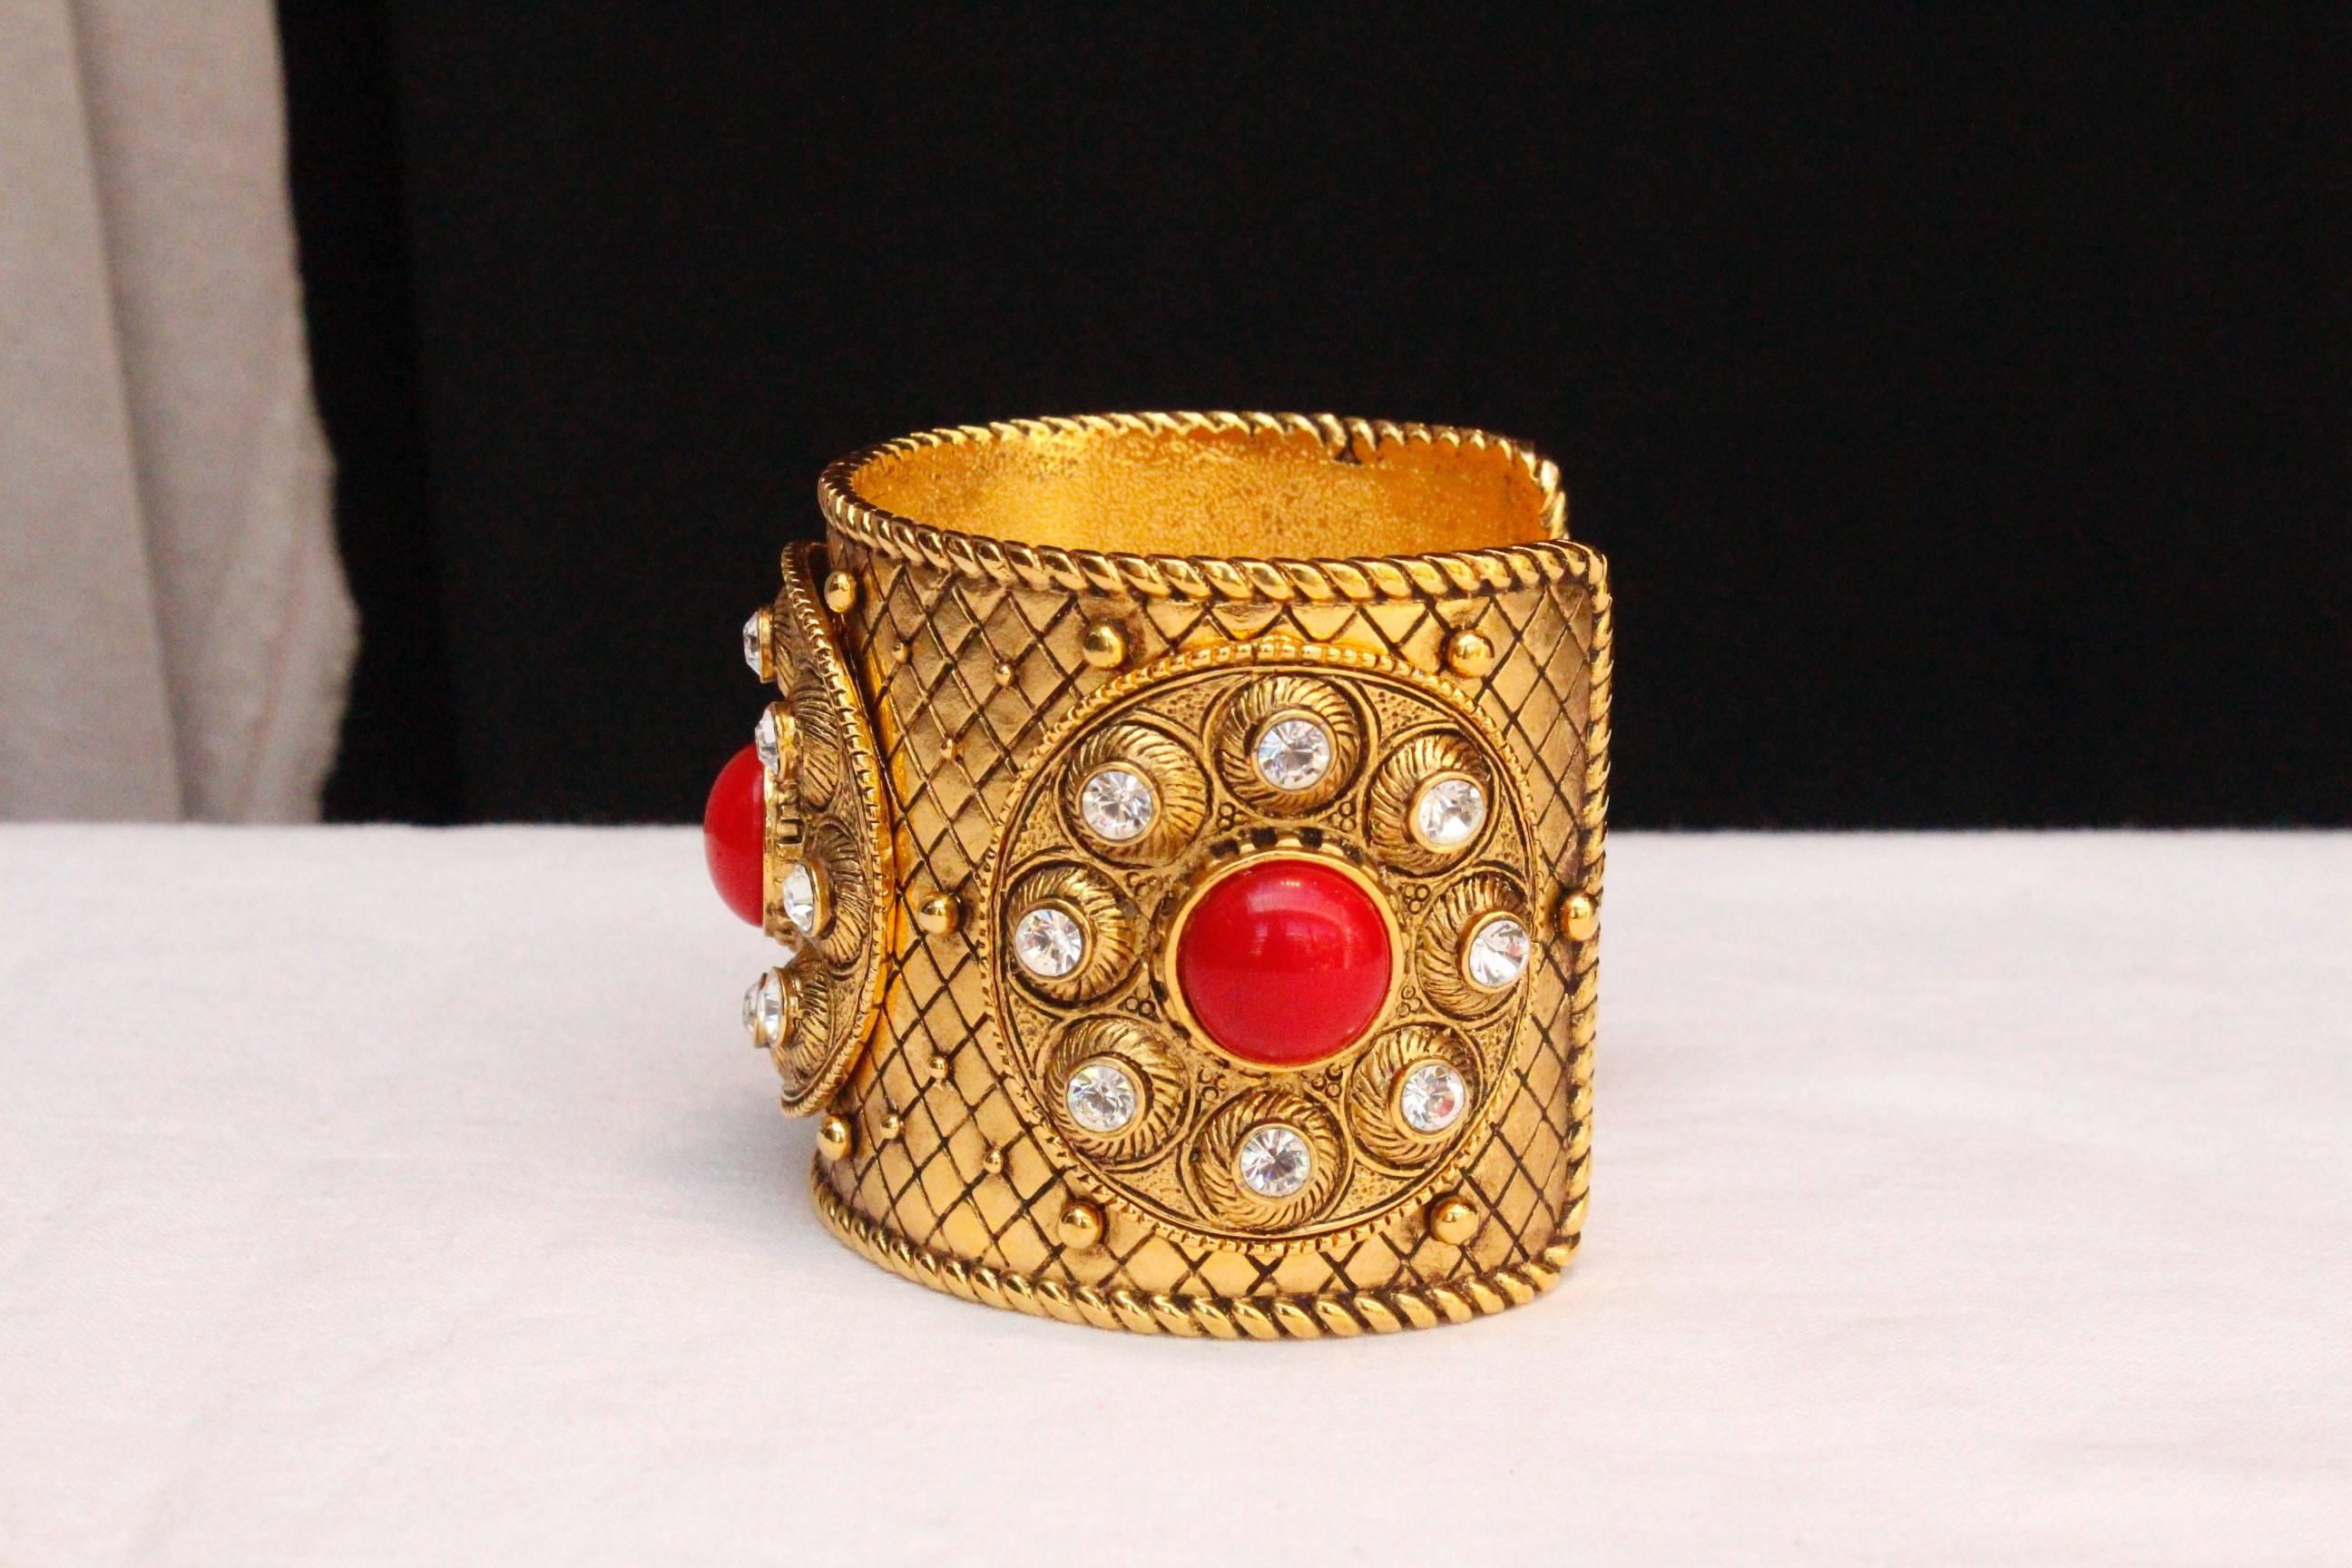 CHRISTIAN DIOR BOUTIQUE – Cuff bracelet composed of chiseled gilded metal decorated with three circles paved with rhinestones and a centered red cabochon.  Signed inside.

Circa 1990.

Wrist circumference 17.5 cm (7 in); Opening 3 cm (1.25 in);